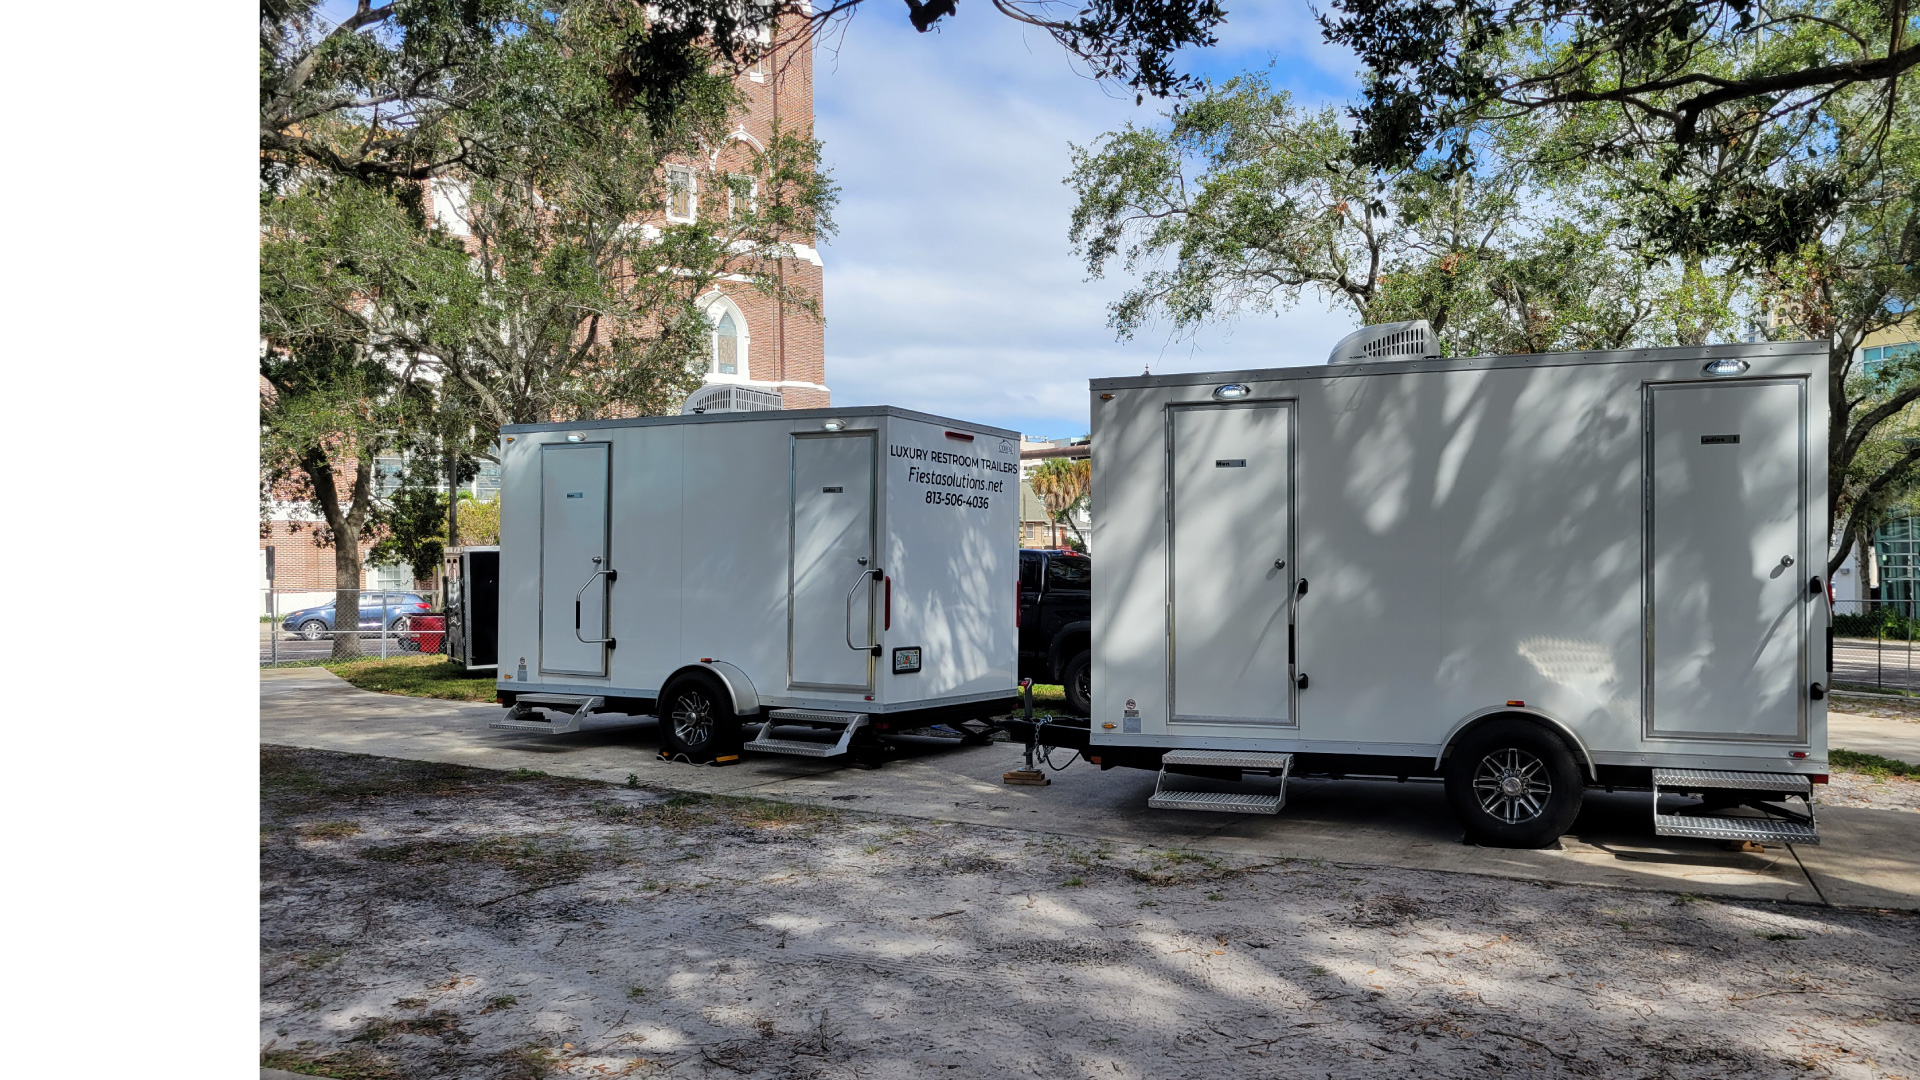 Discover luxury restroom trailer rentals in Tampa by PCS. Elegant, clean, and fully-equipped for weddings, events, and more. Book now!